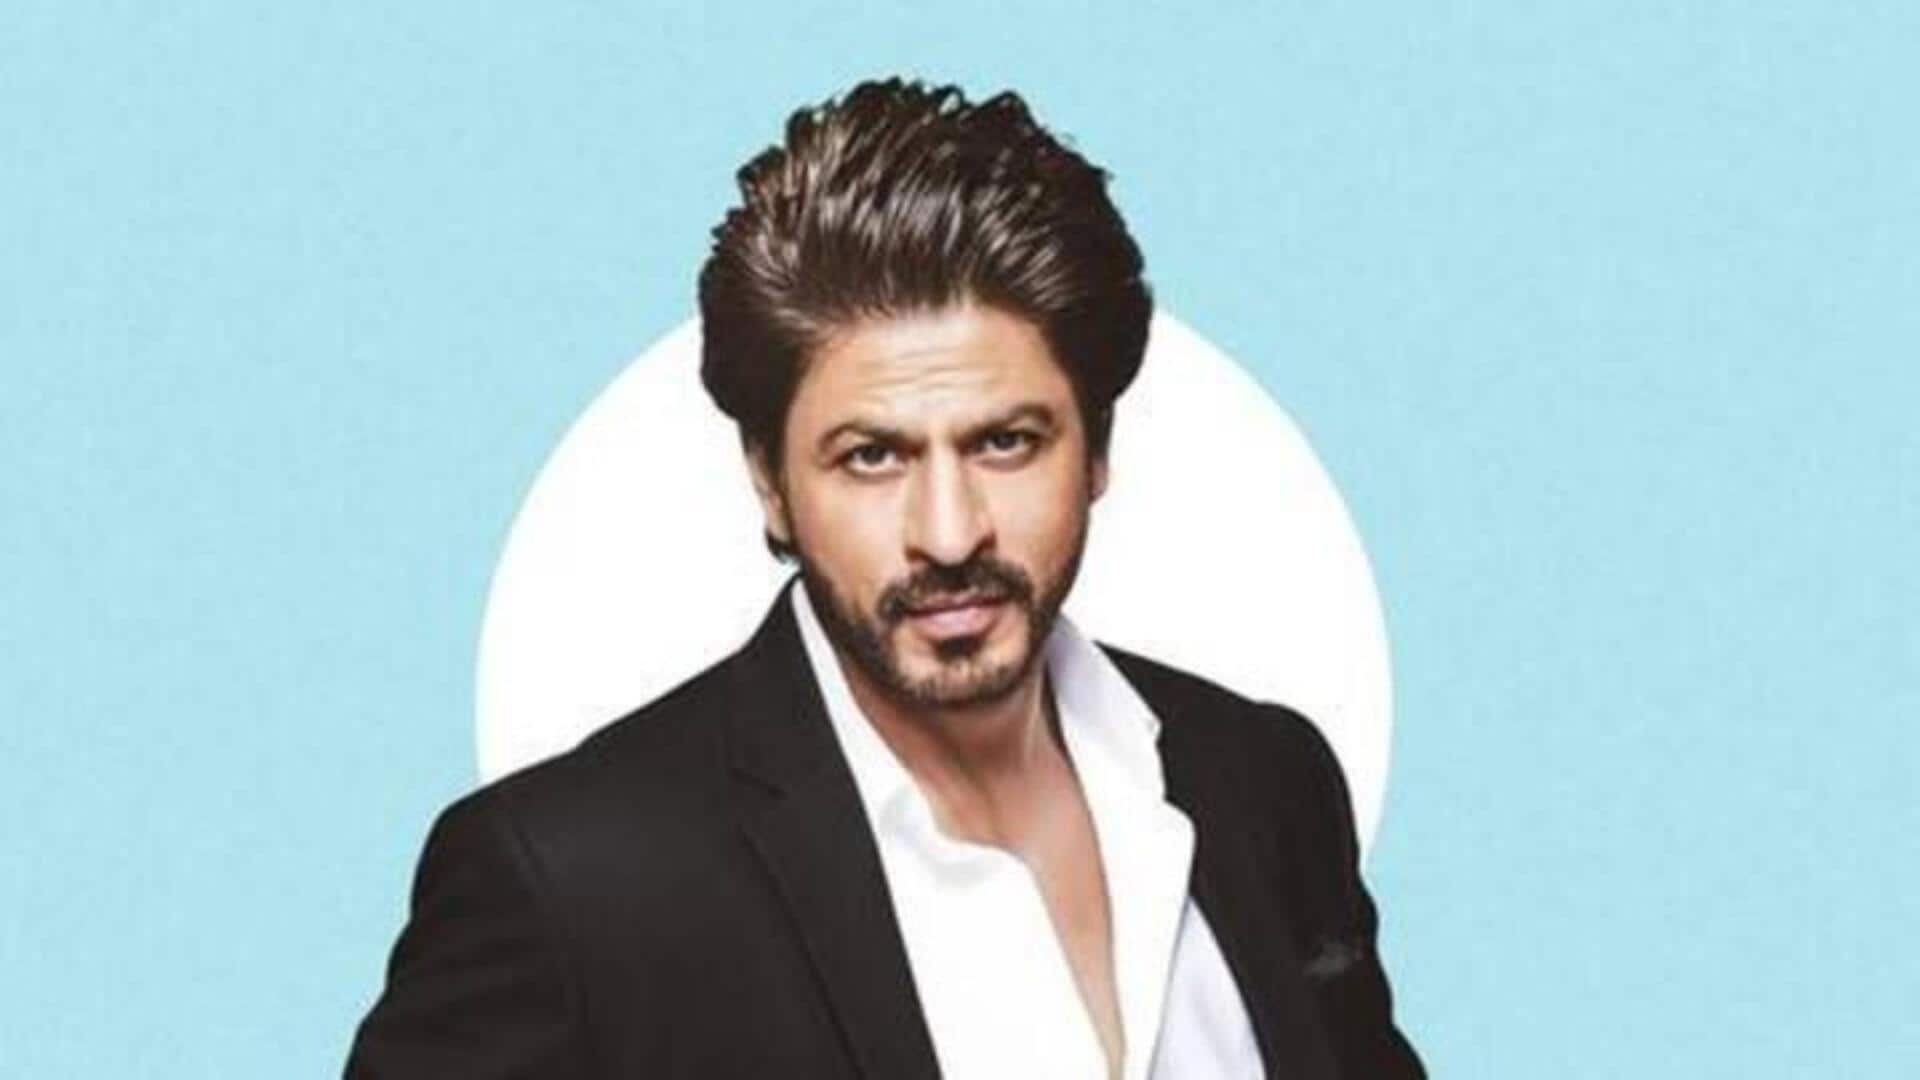 Shah Rukh Khan's upcoming film 'King' sparks excitement among fans